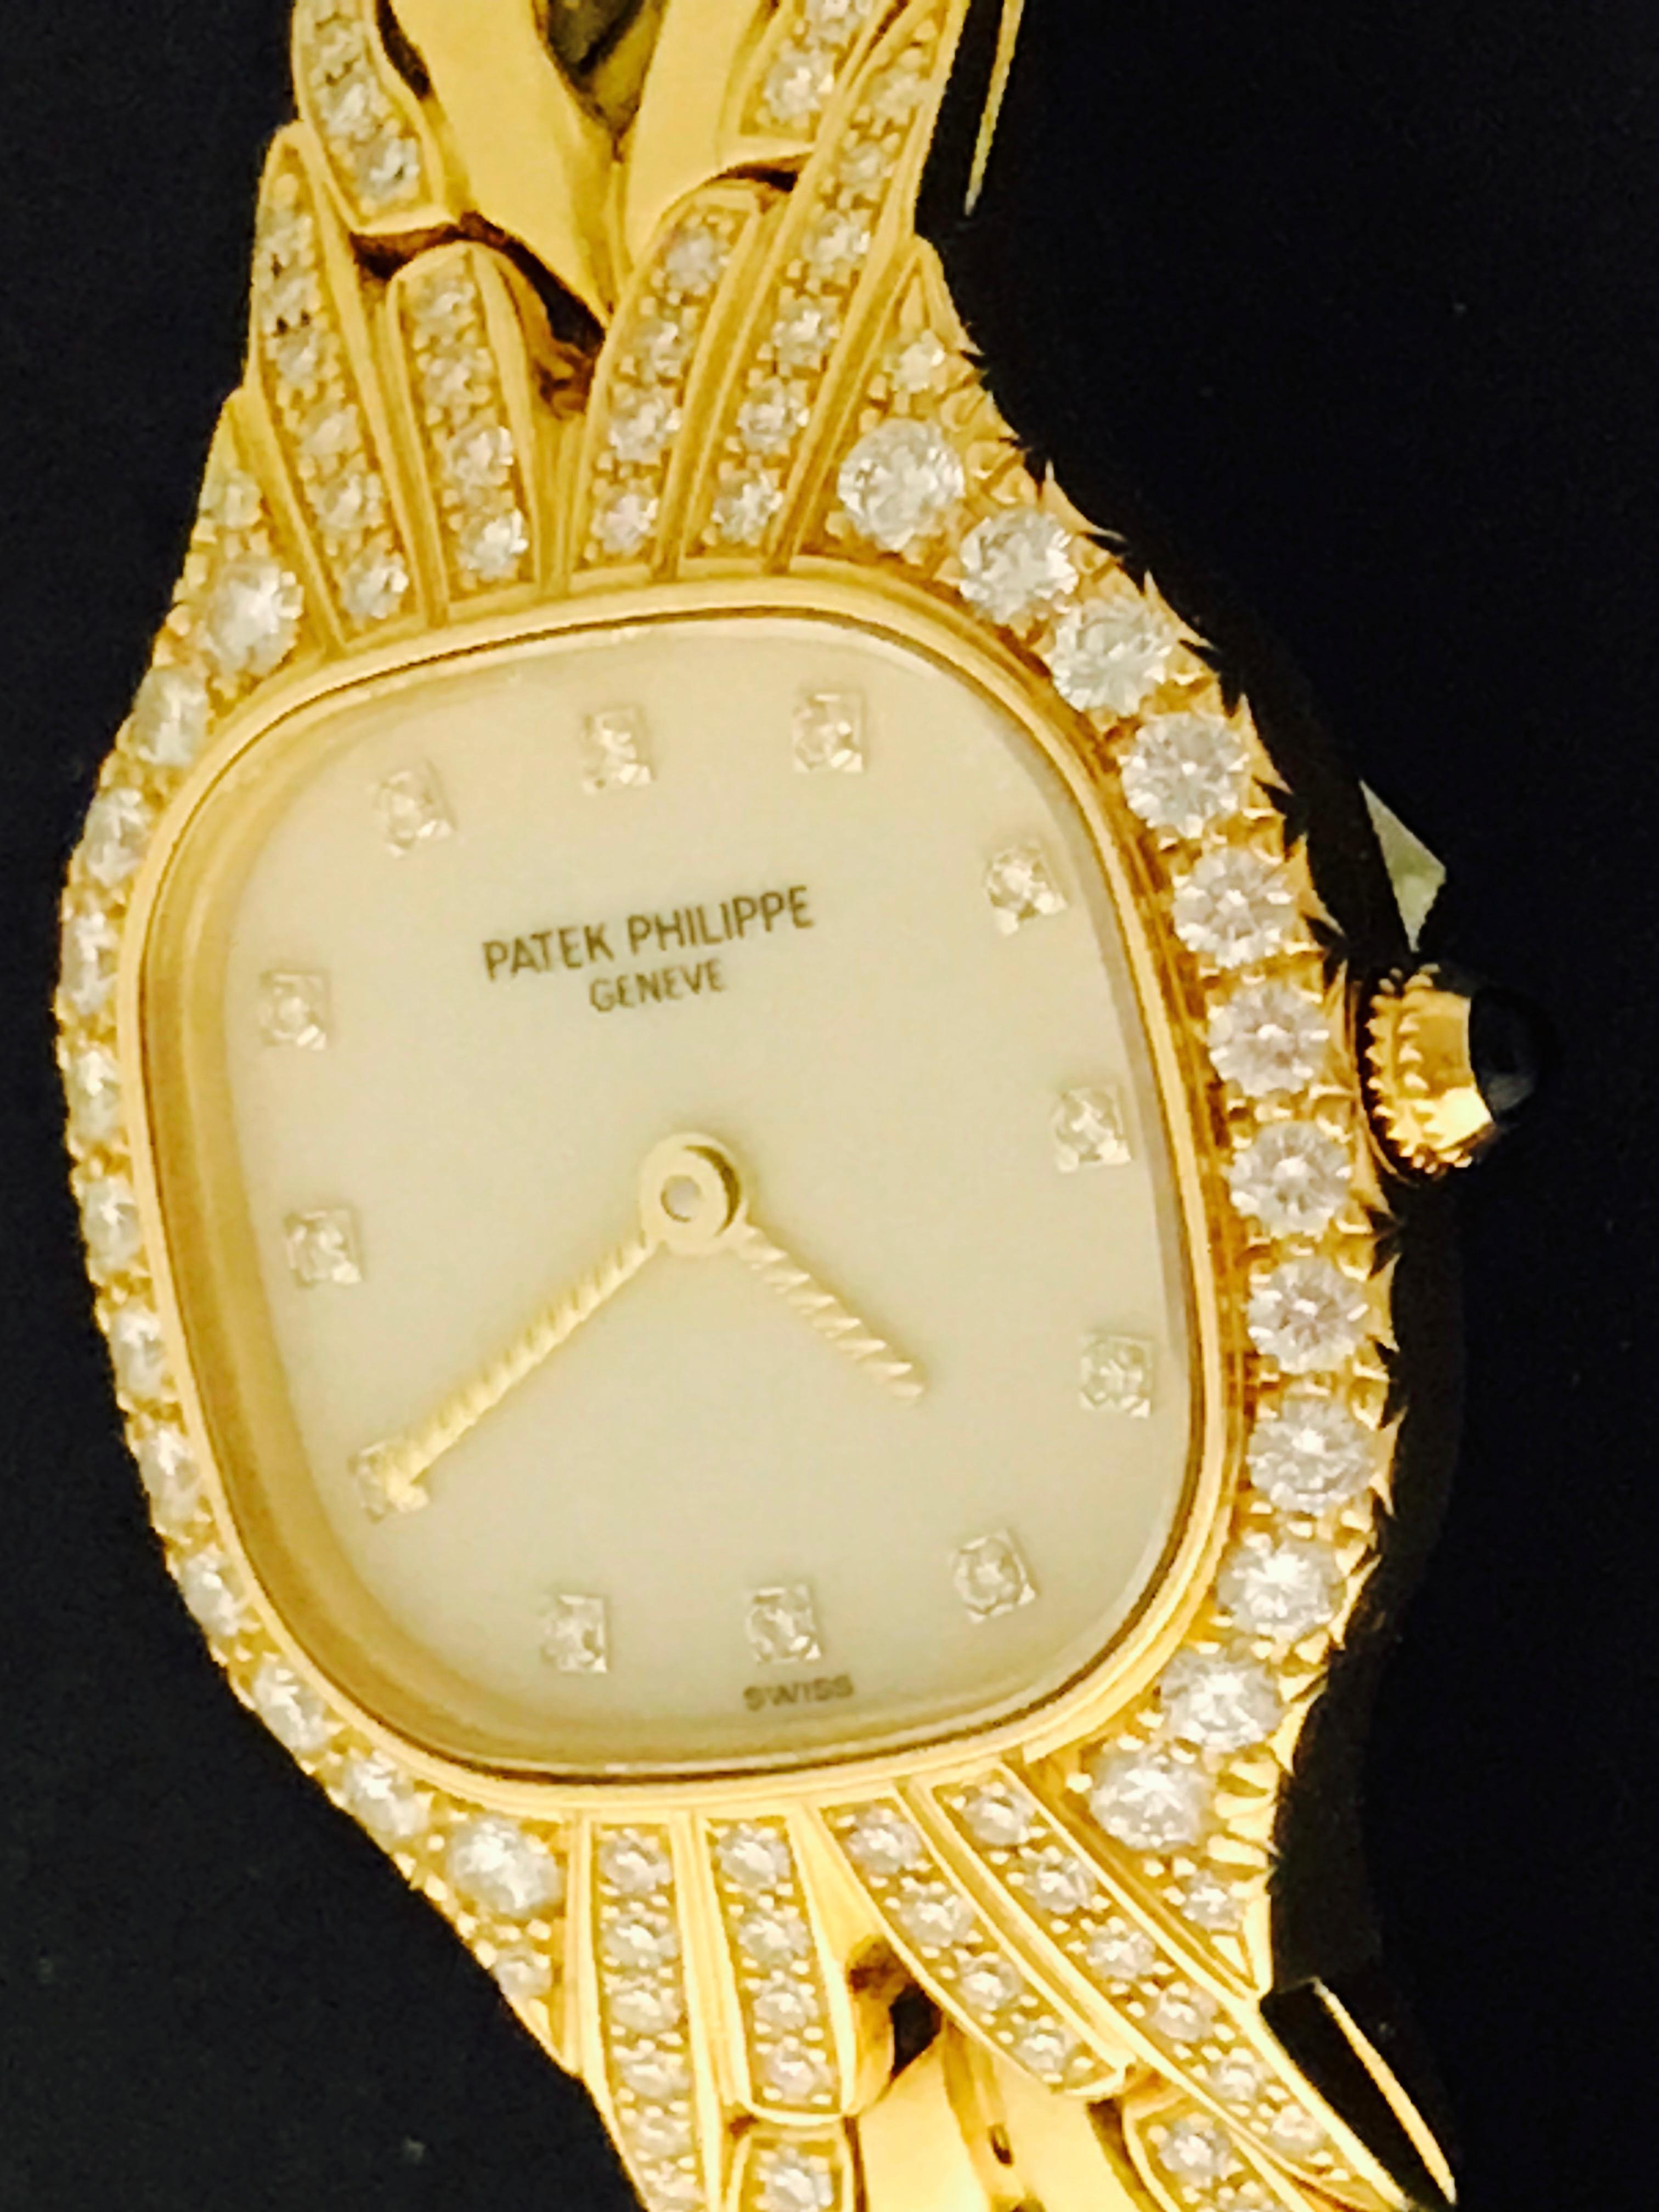 Patek Philippe La Flamme Ladies 4815/003 Quartz Wrist Watch in 18K Yellow Gold.  This timepiece features an 18k Yellow Gold Diamond case and lugs measuring 22x27mm.  Ivory Dial with Diamond hour markers. 18k Yellow Gold and partial diamond Patek